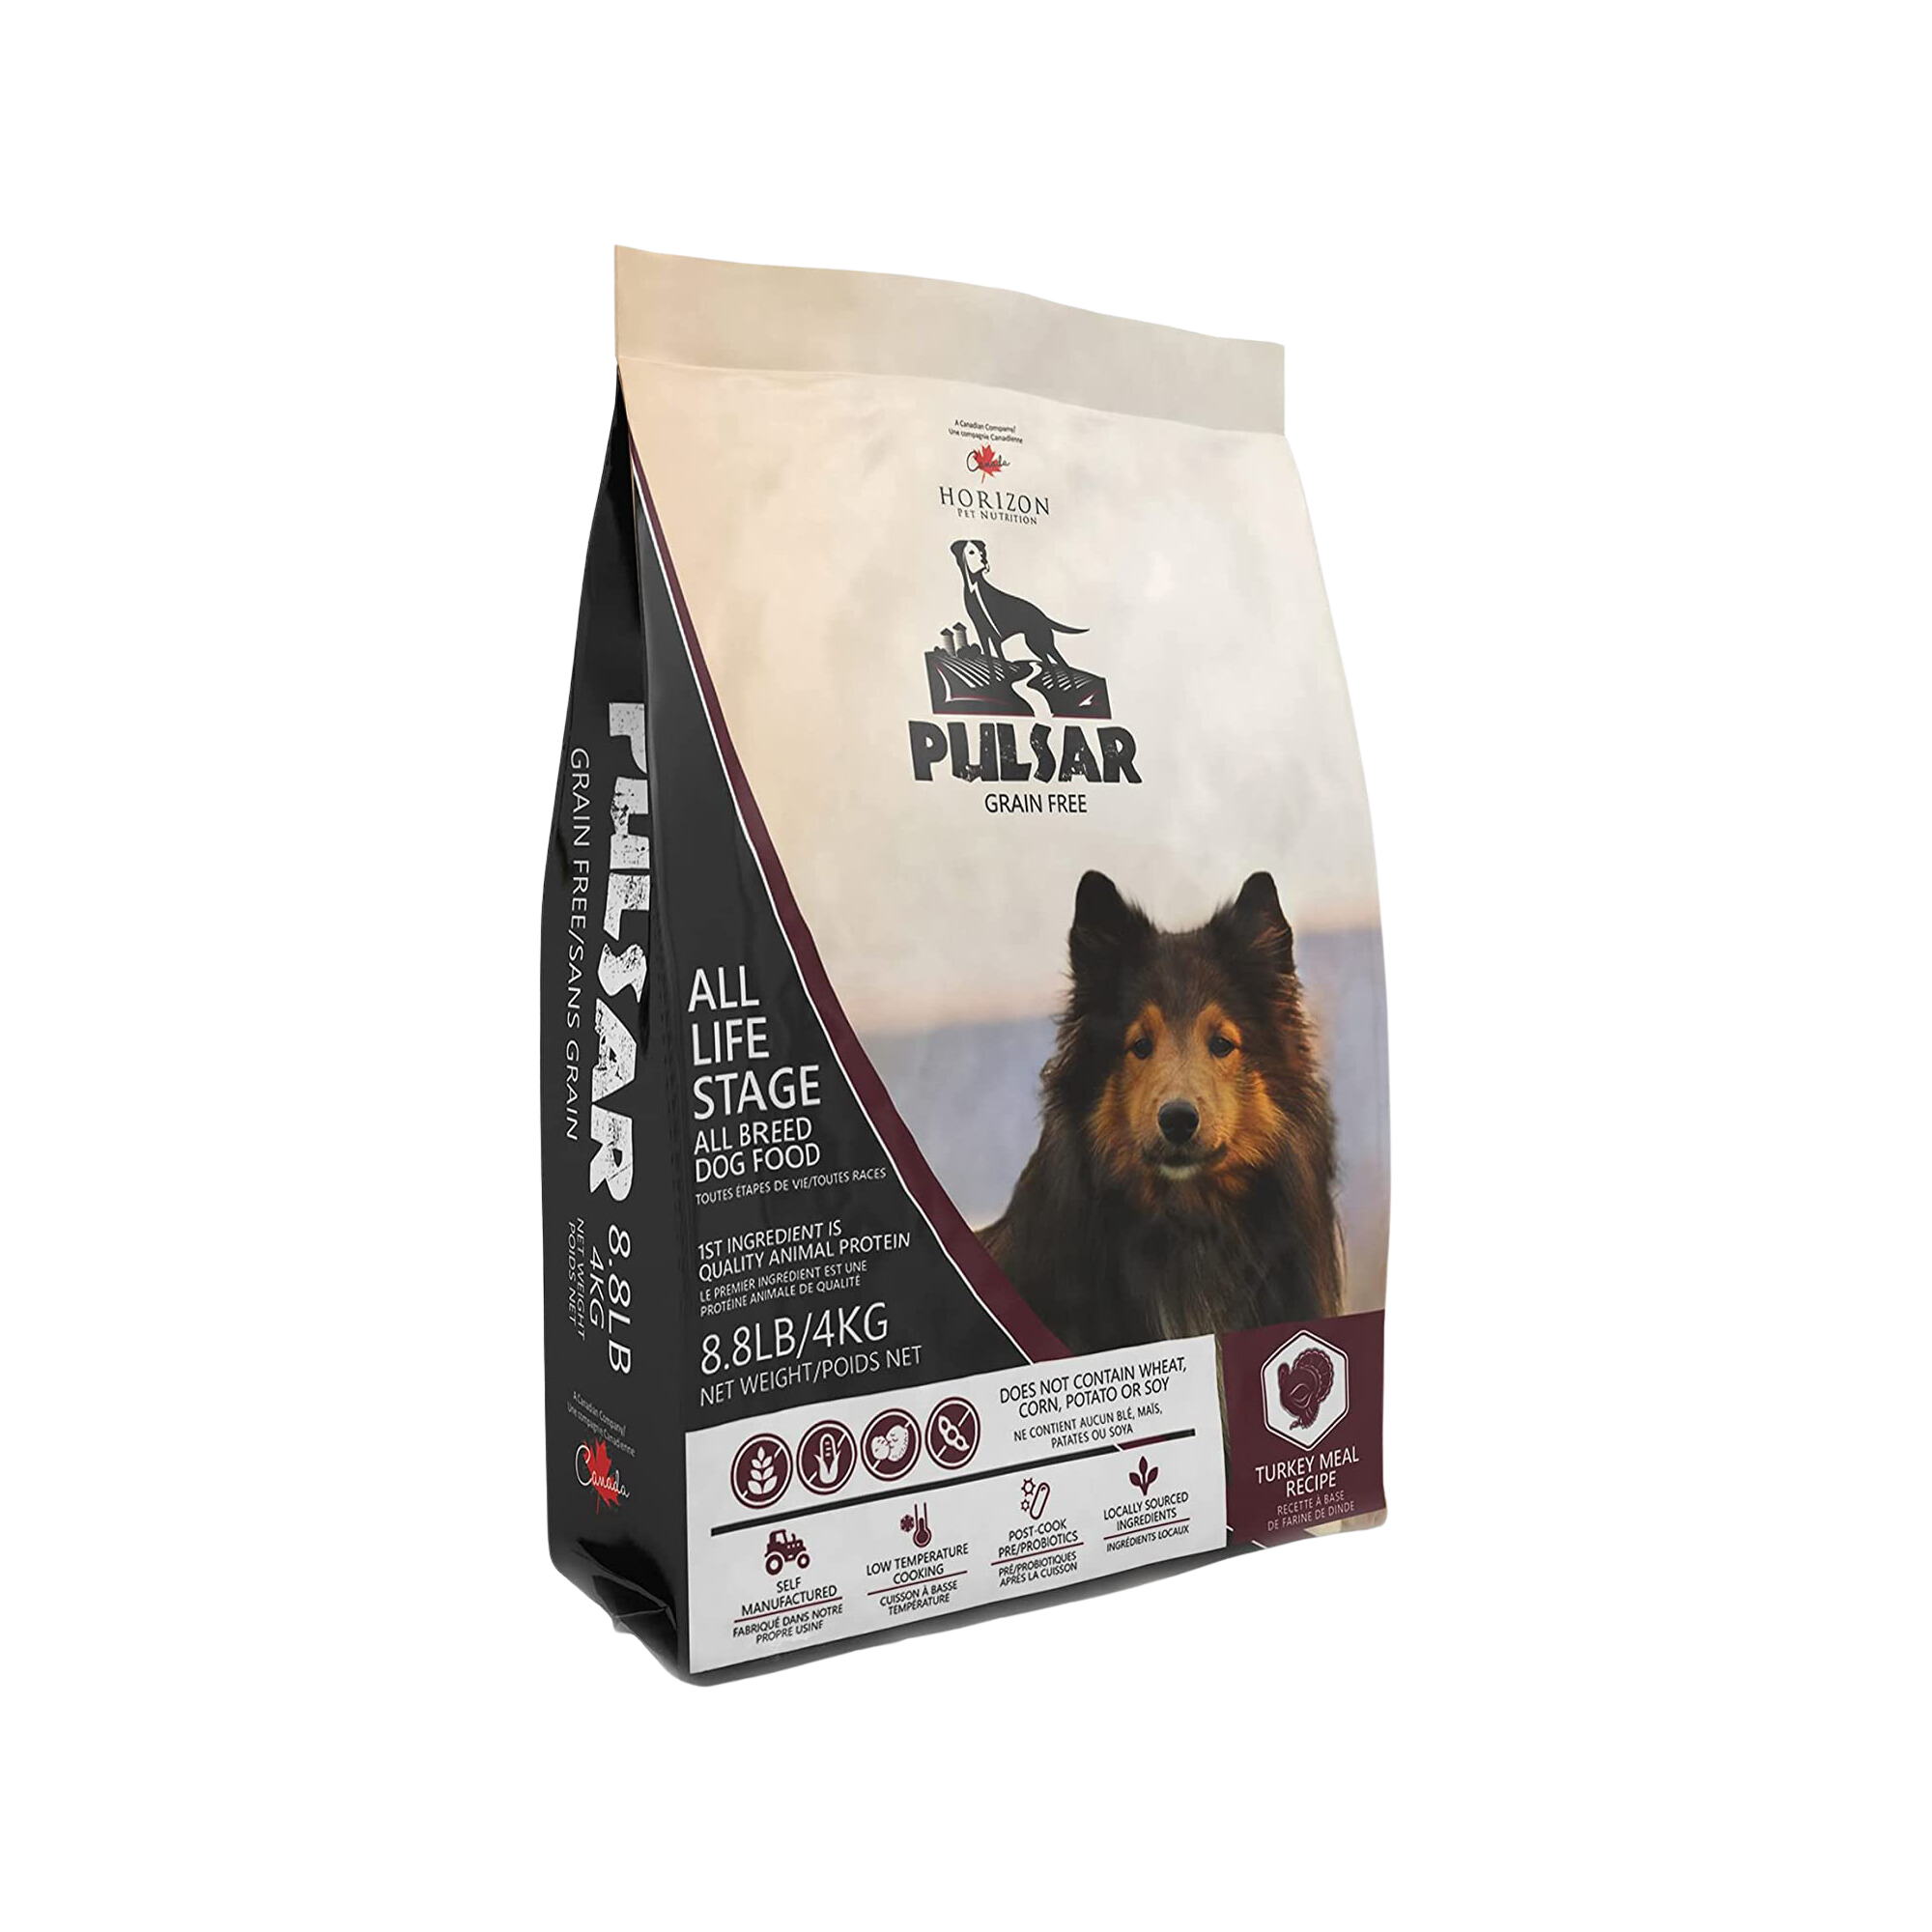 Pulsar All Life Stage, All Breed Dog Food, Grain-Free, Turkey Meal Recipe